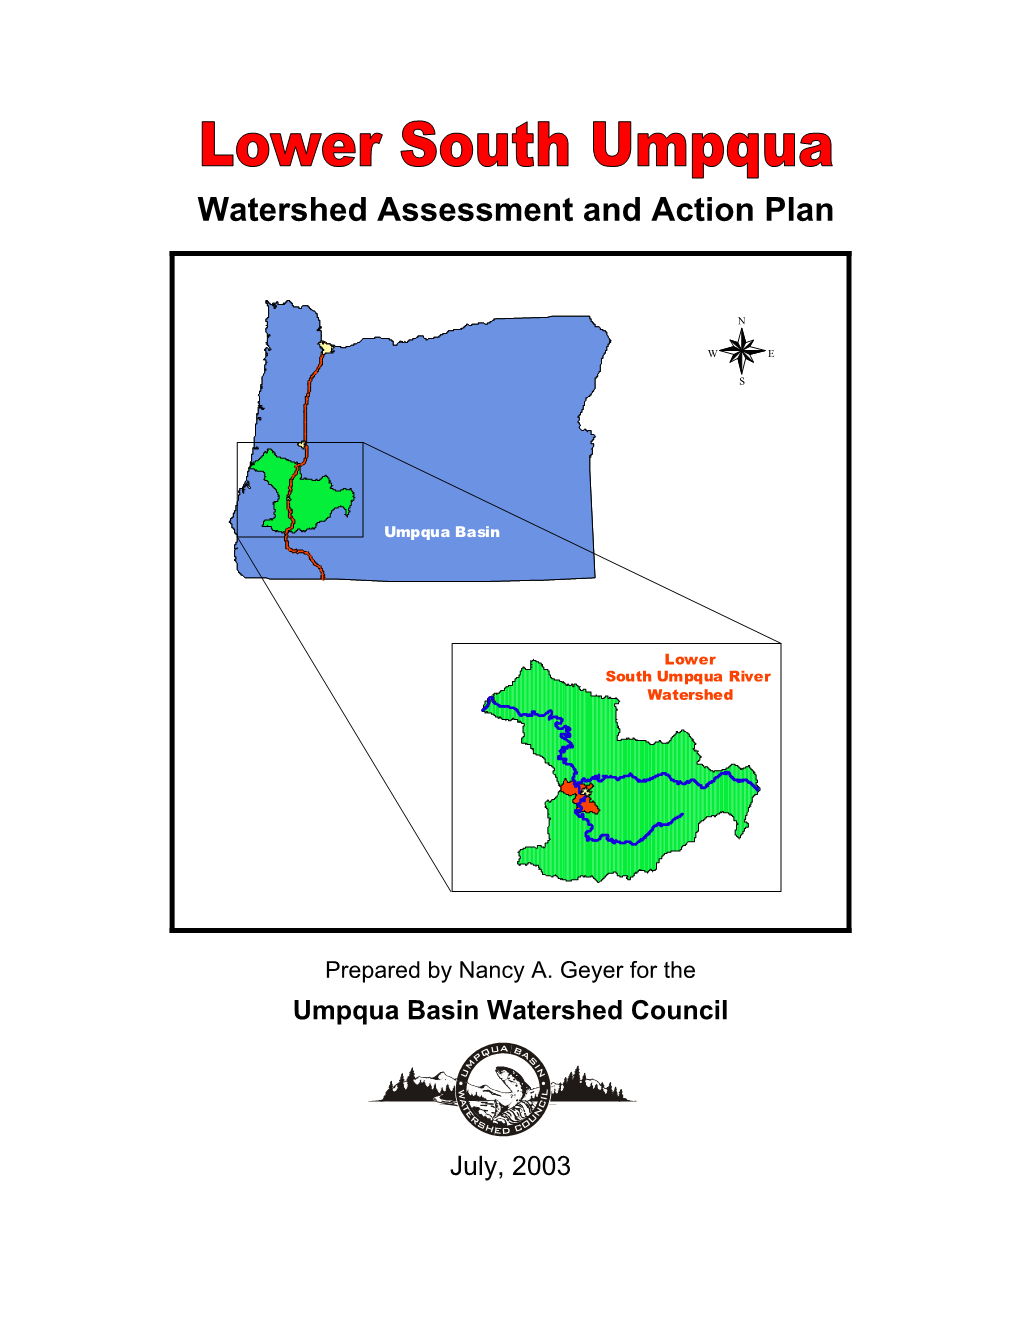 Lower South Umpqua Watershed Assessment and Action Plan